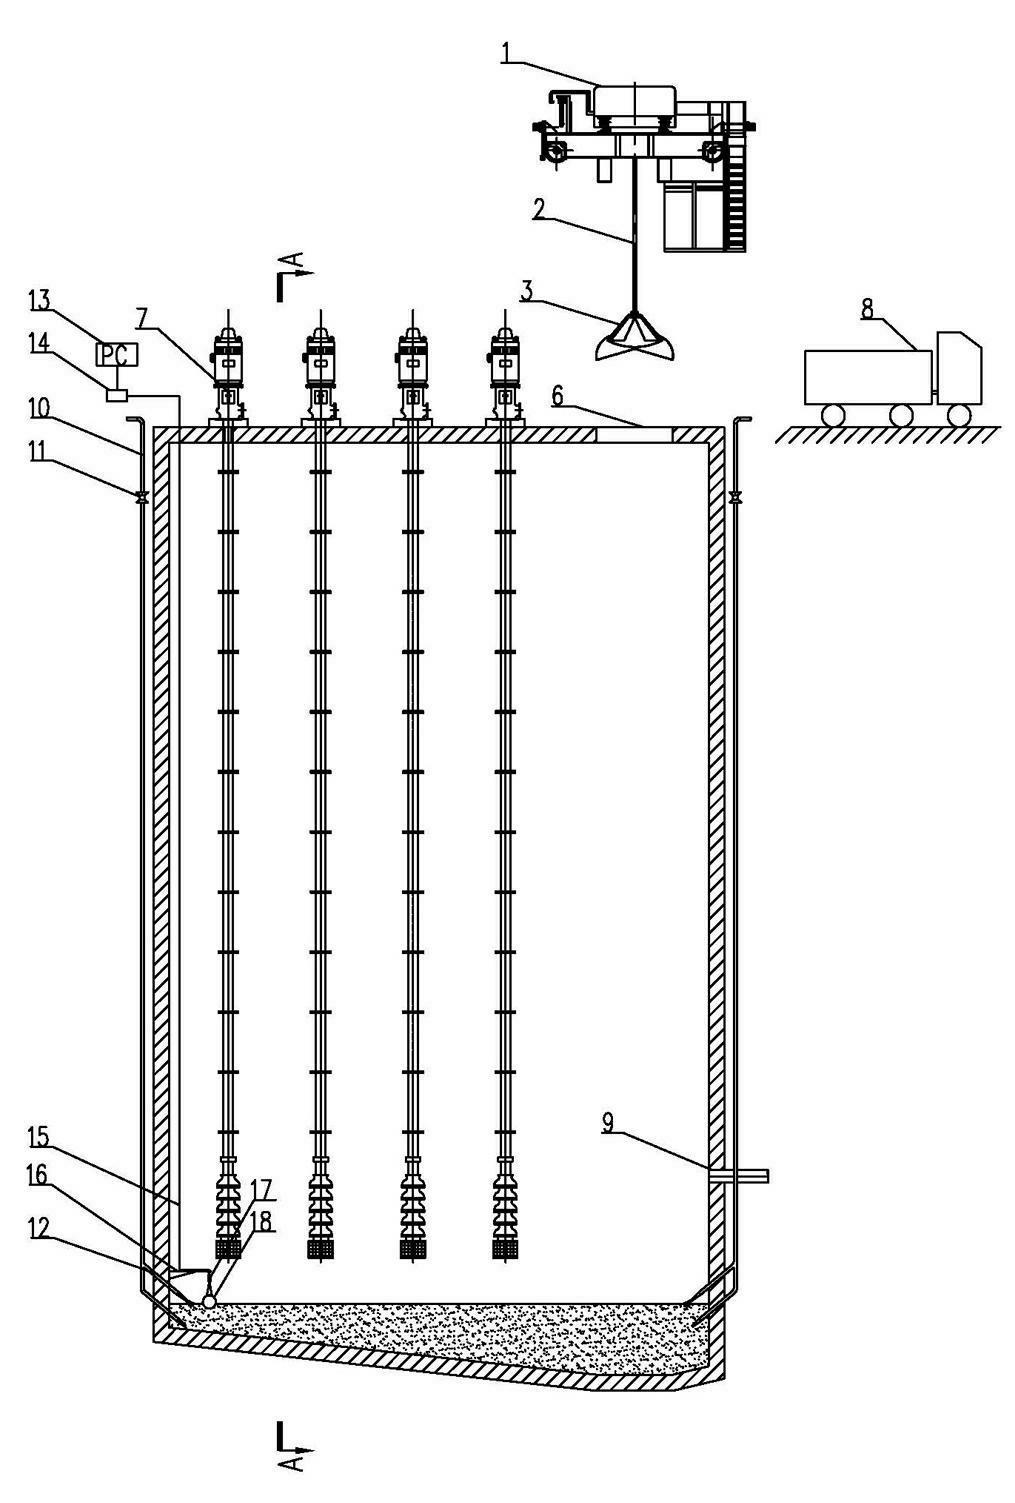 Sump dredging system and mode